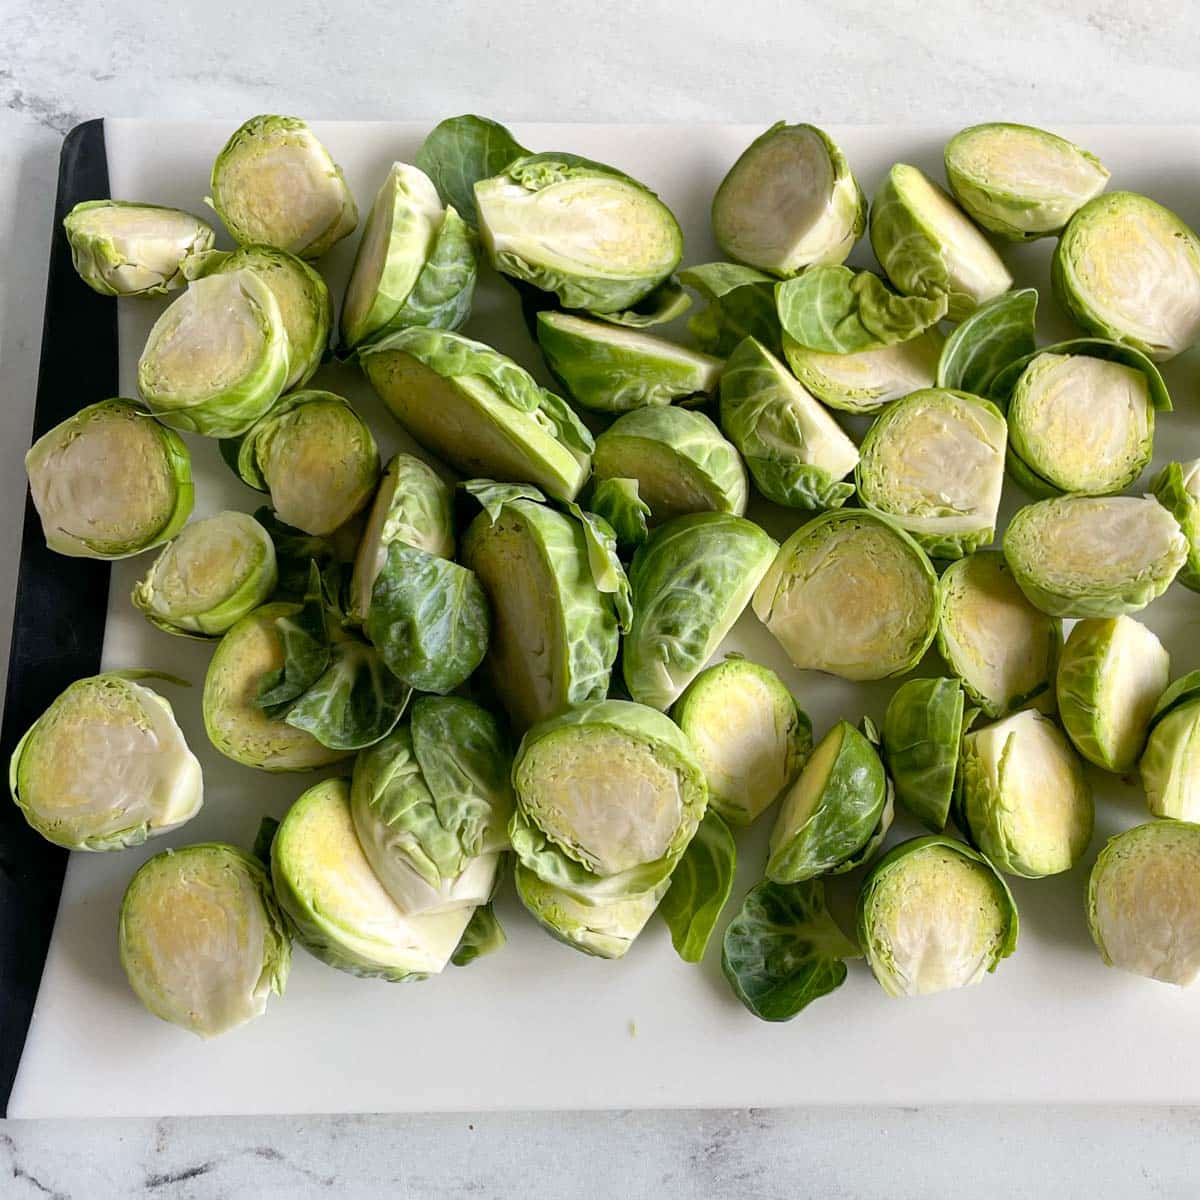 A cutting board is covered in halved Brussels sprouts.